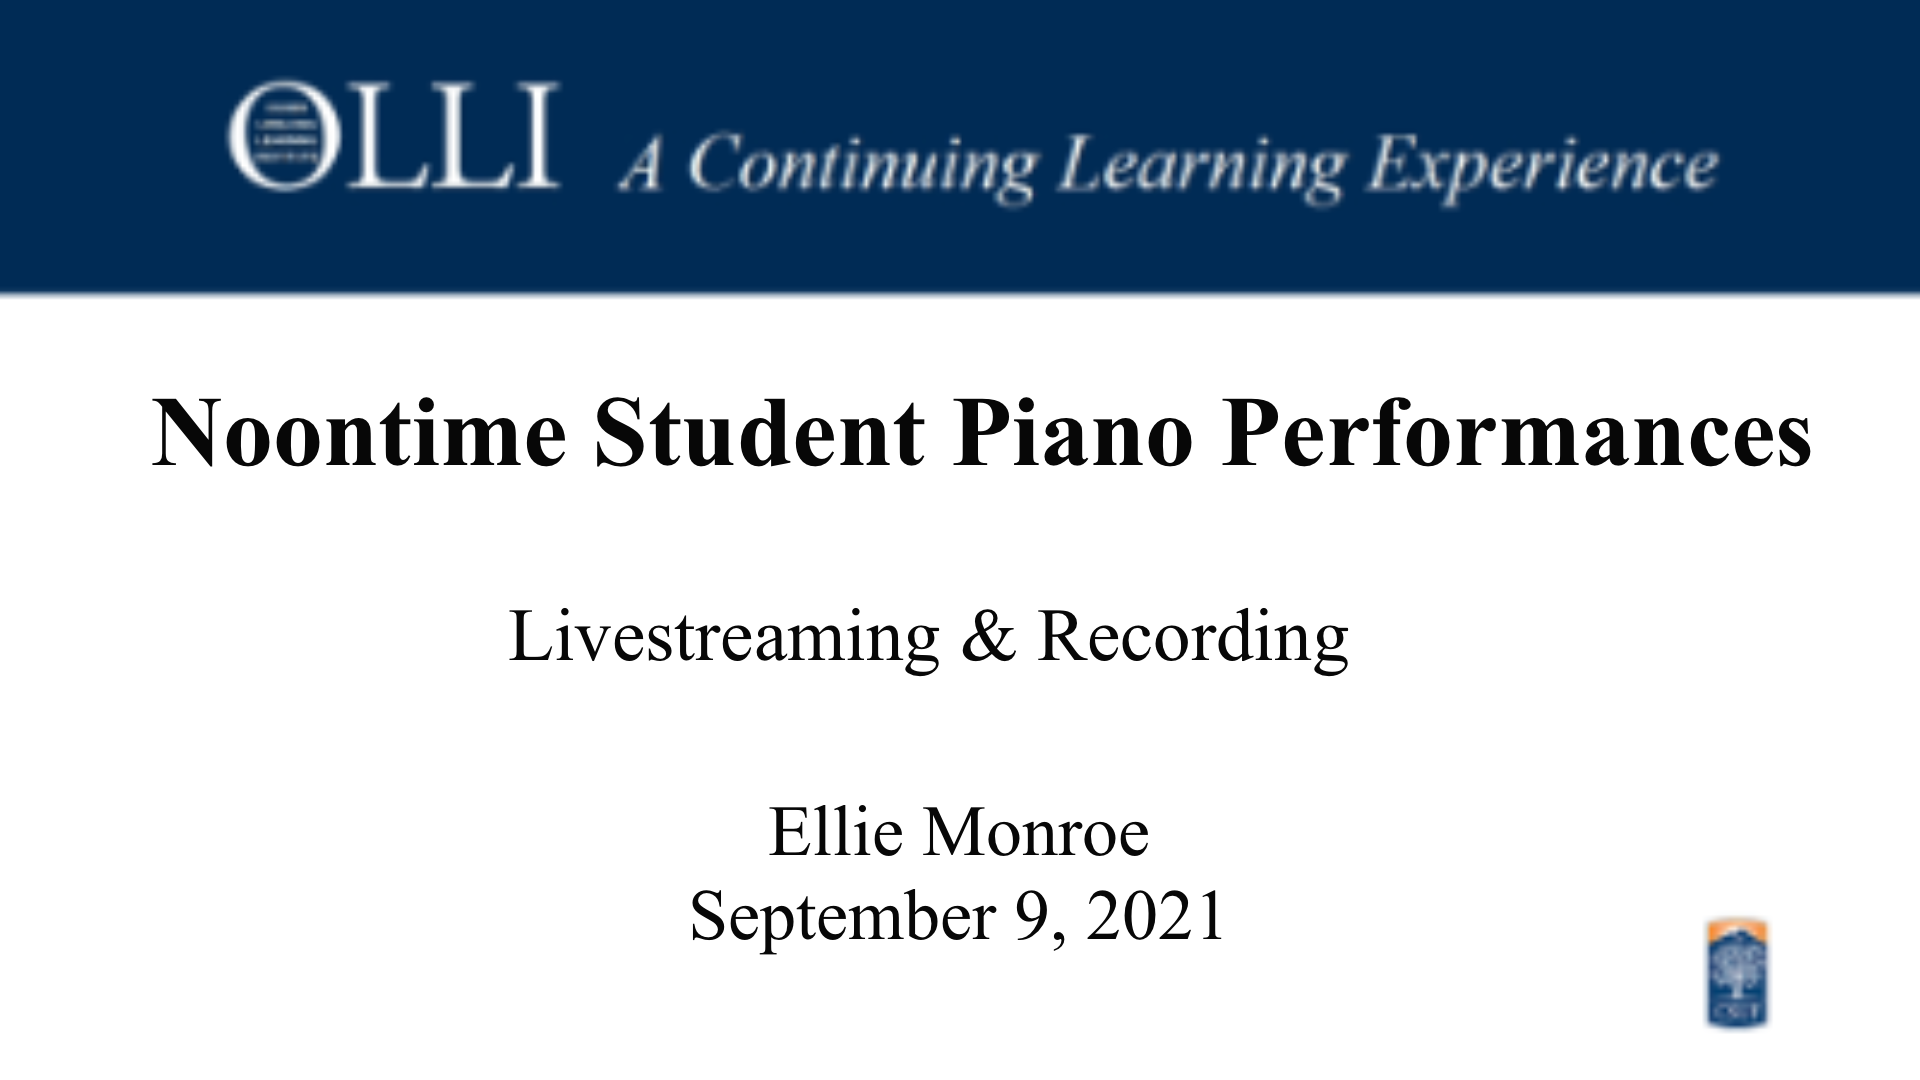 Click here to view the livestream of noontime piano